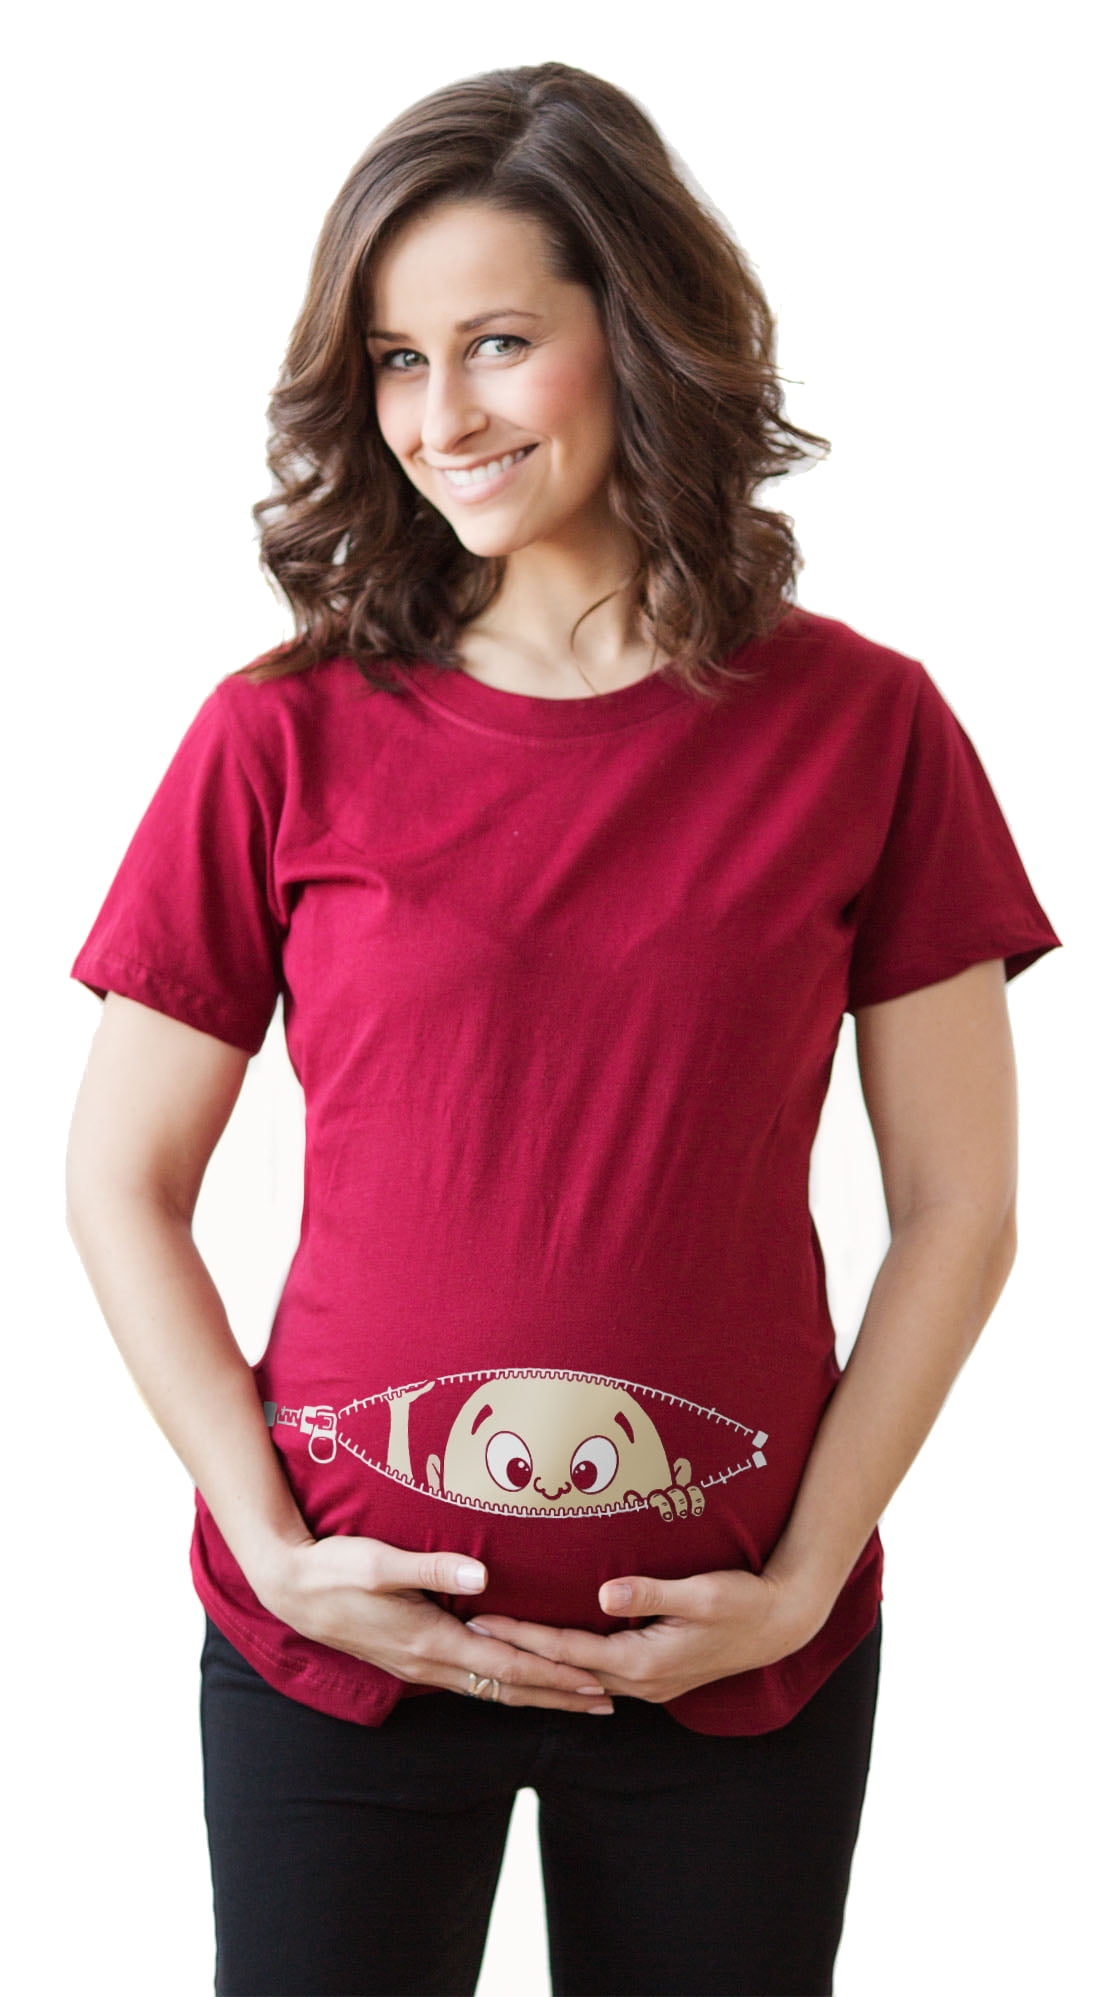 Maternity Baby Peeking T Shirt Funny Pregnancy Tee For Expecting Mothers (Red) - M -